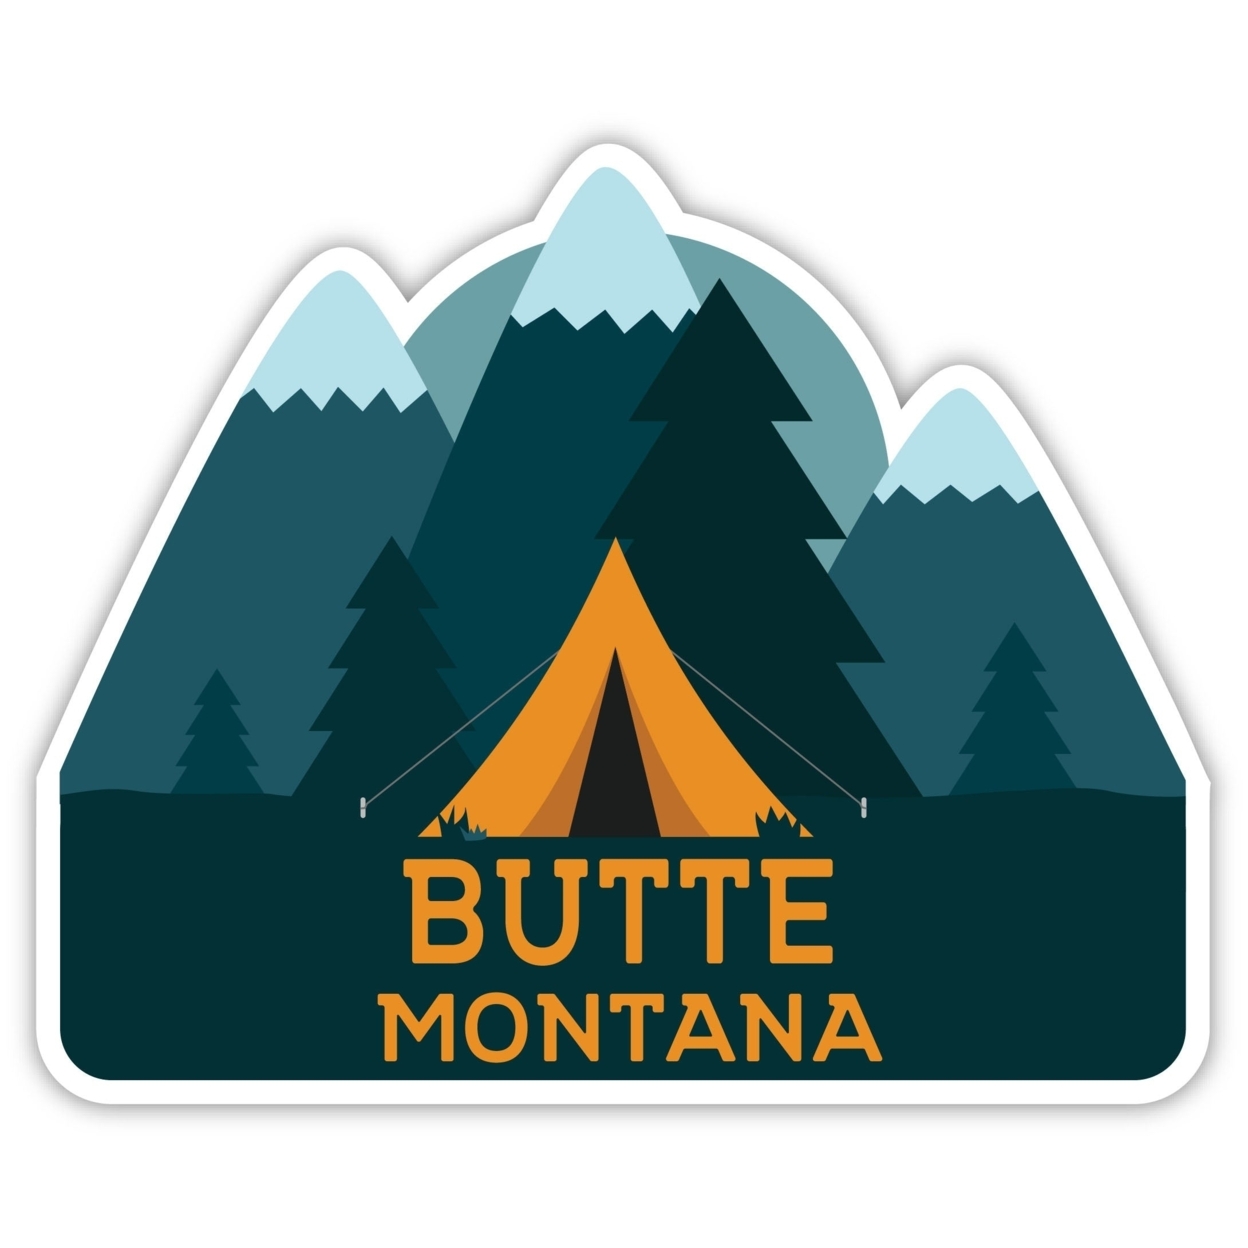 Butte Montana Souvenir Decorative Stickers (Choose Theme And Size) - 4-Pack, 4-Inch, Tent